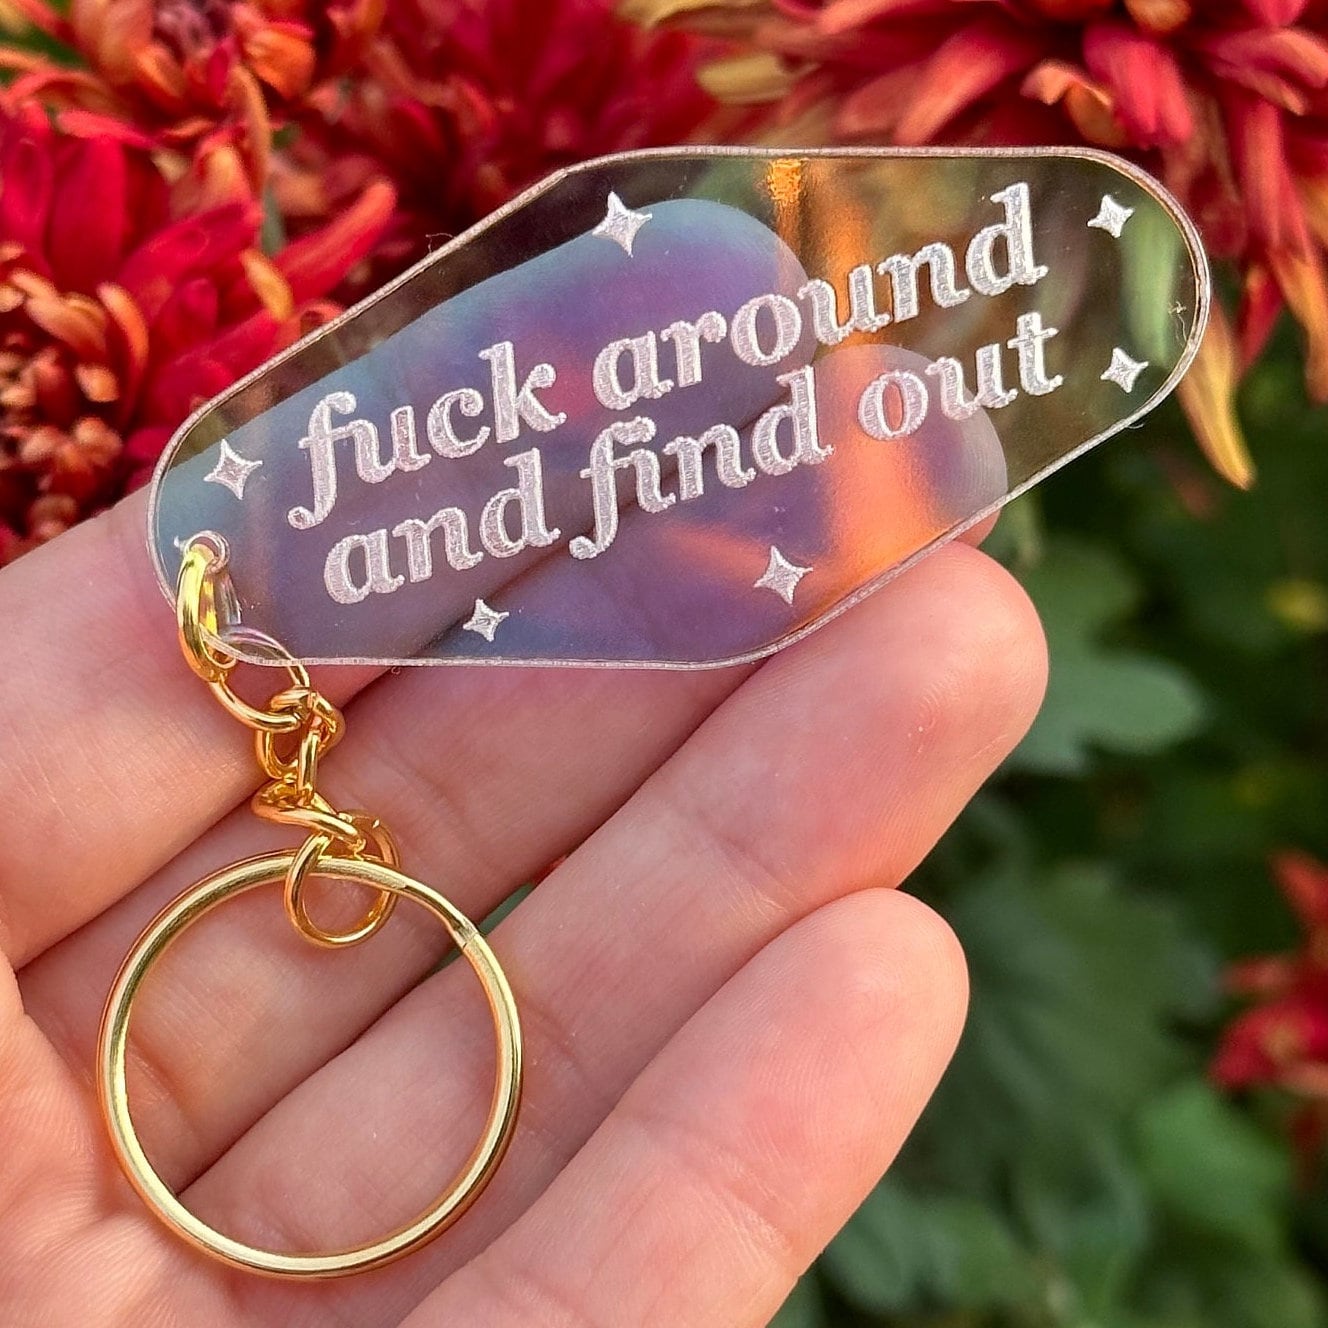 Fuck Around & Find Out Iridescent Acrylic Motel Keychain